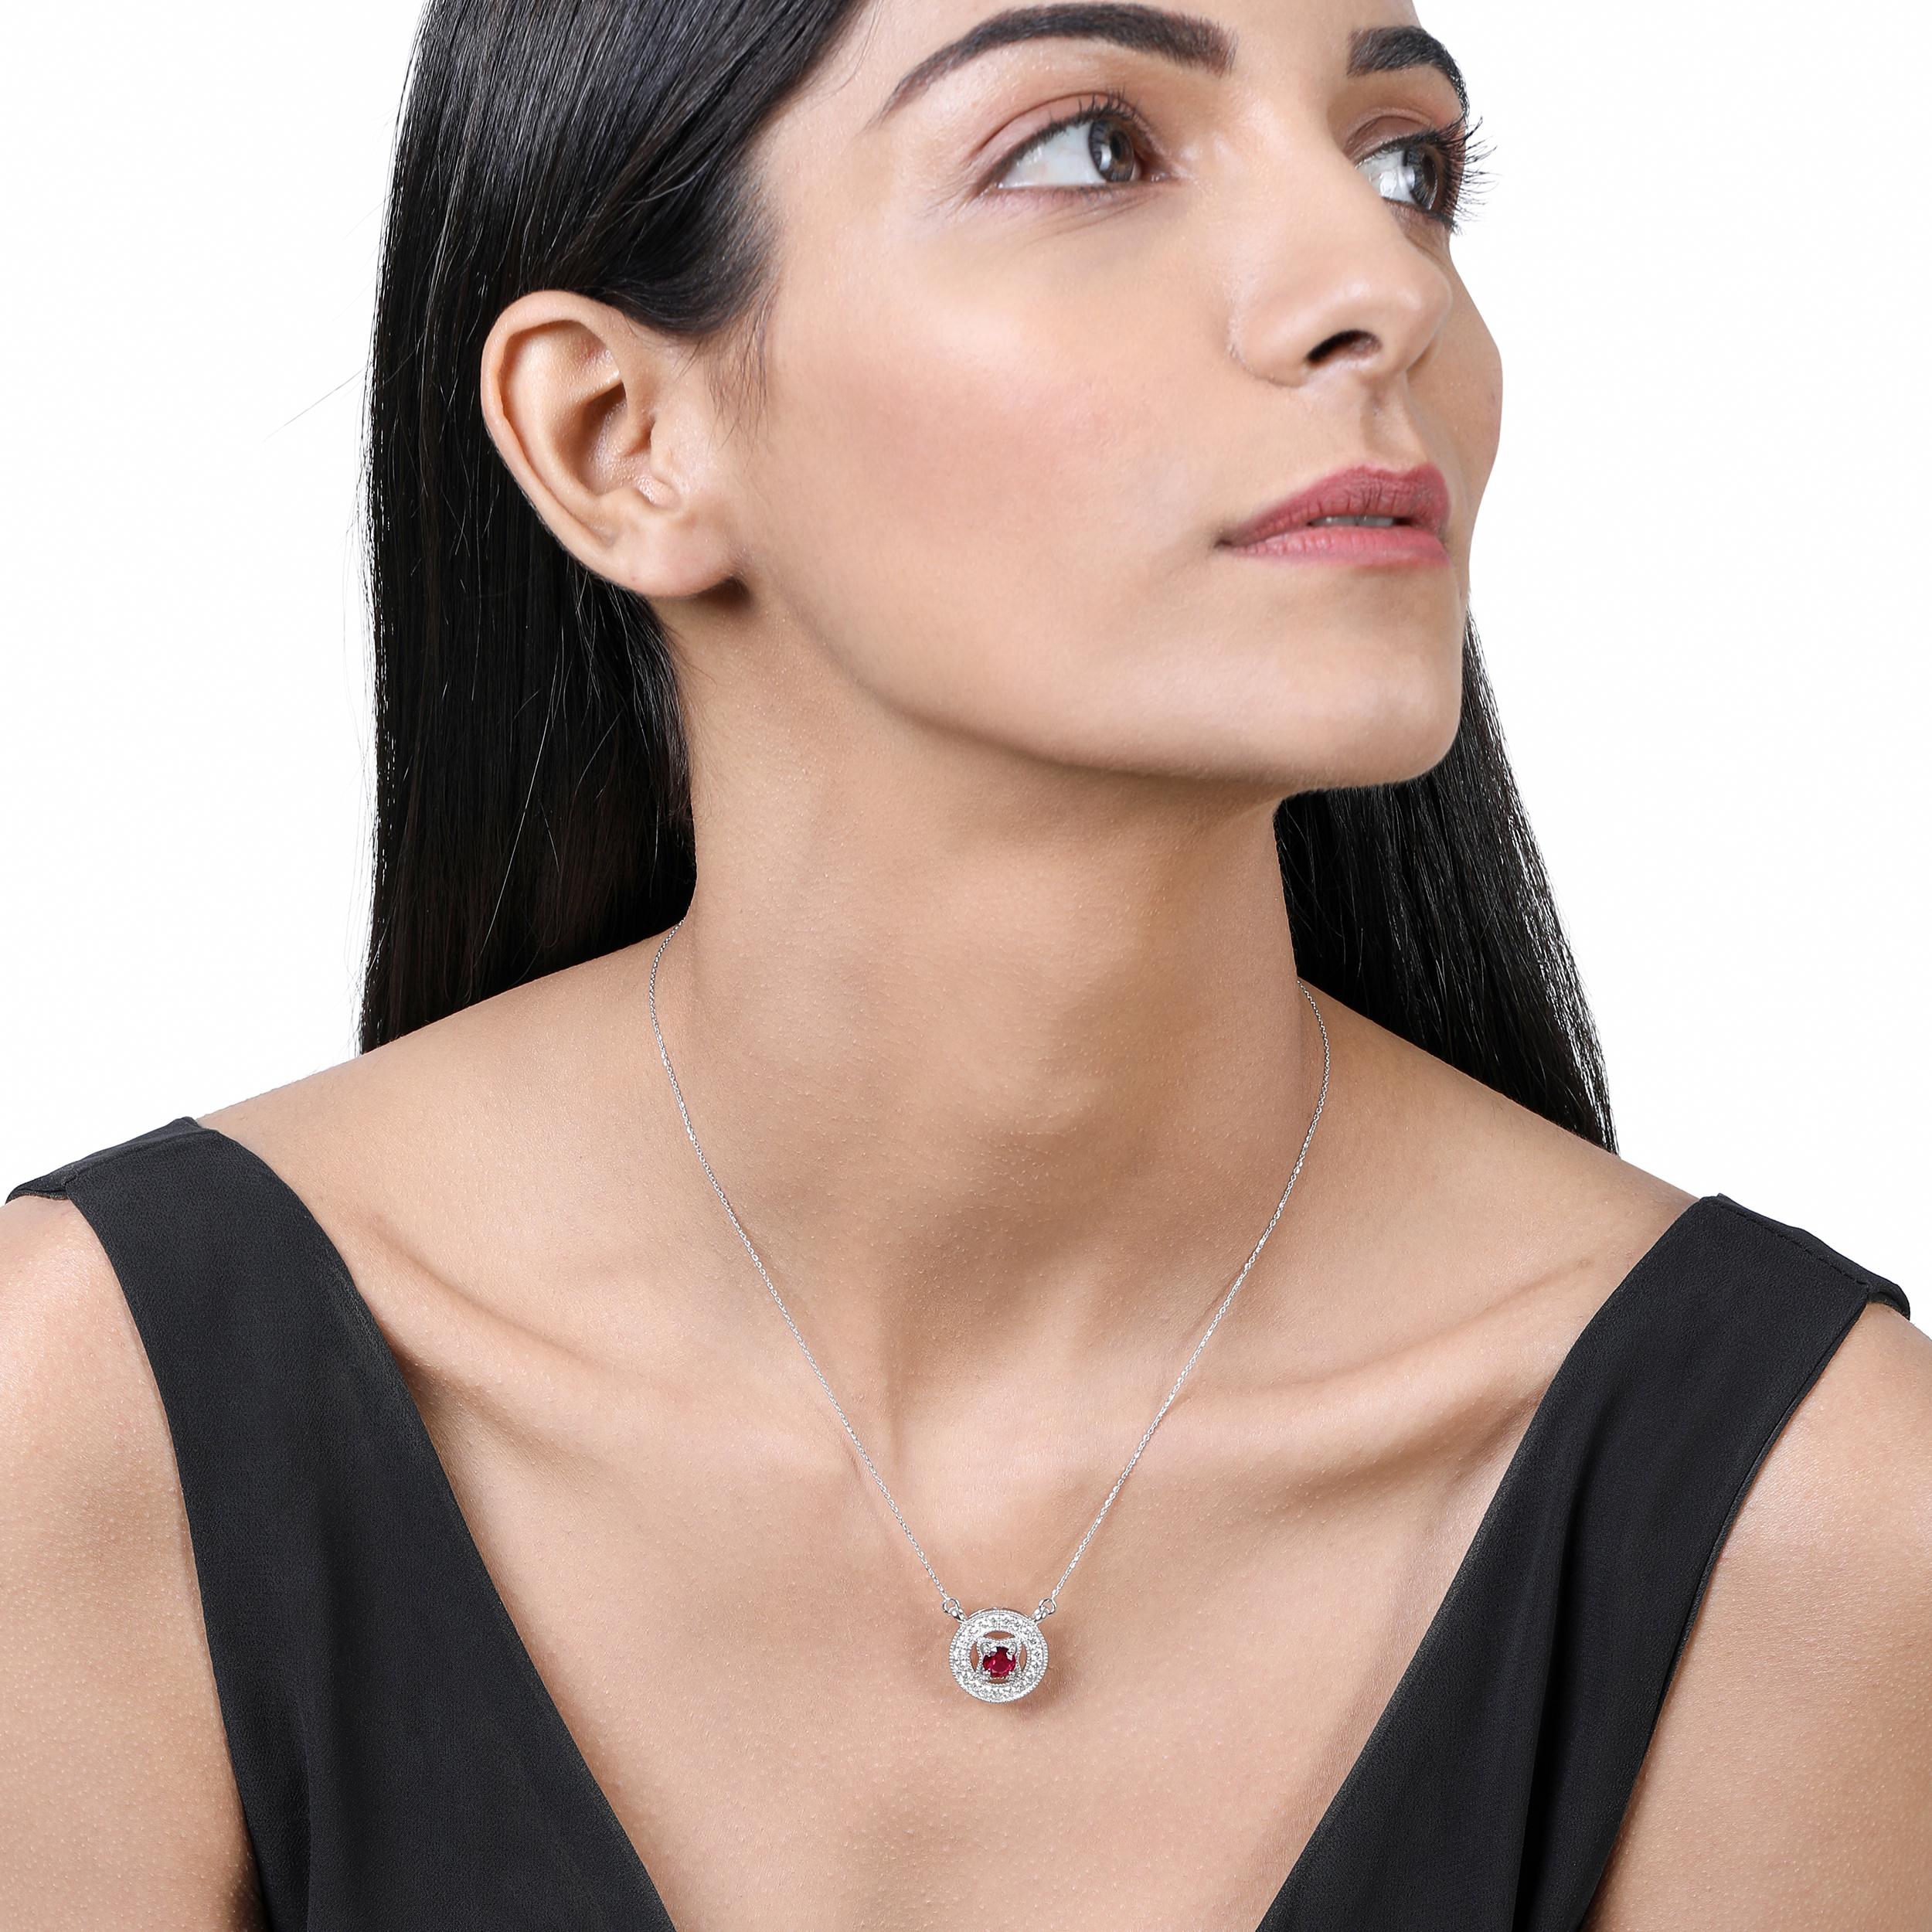 Crafted in 5.95 grams of 18K White Gold, the necklace contains 20 stones of Rose Cut Natural Diamonds with a total of 1.24 carat in E-F color and VVS-VS clarity combined with 135 stones of Round Natural Diamonds with a total of 0.6 carat in E-F